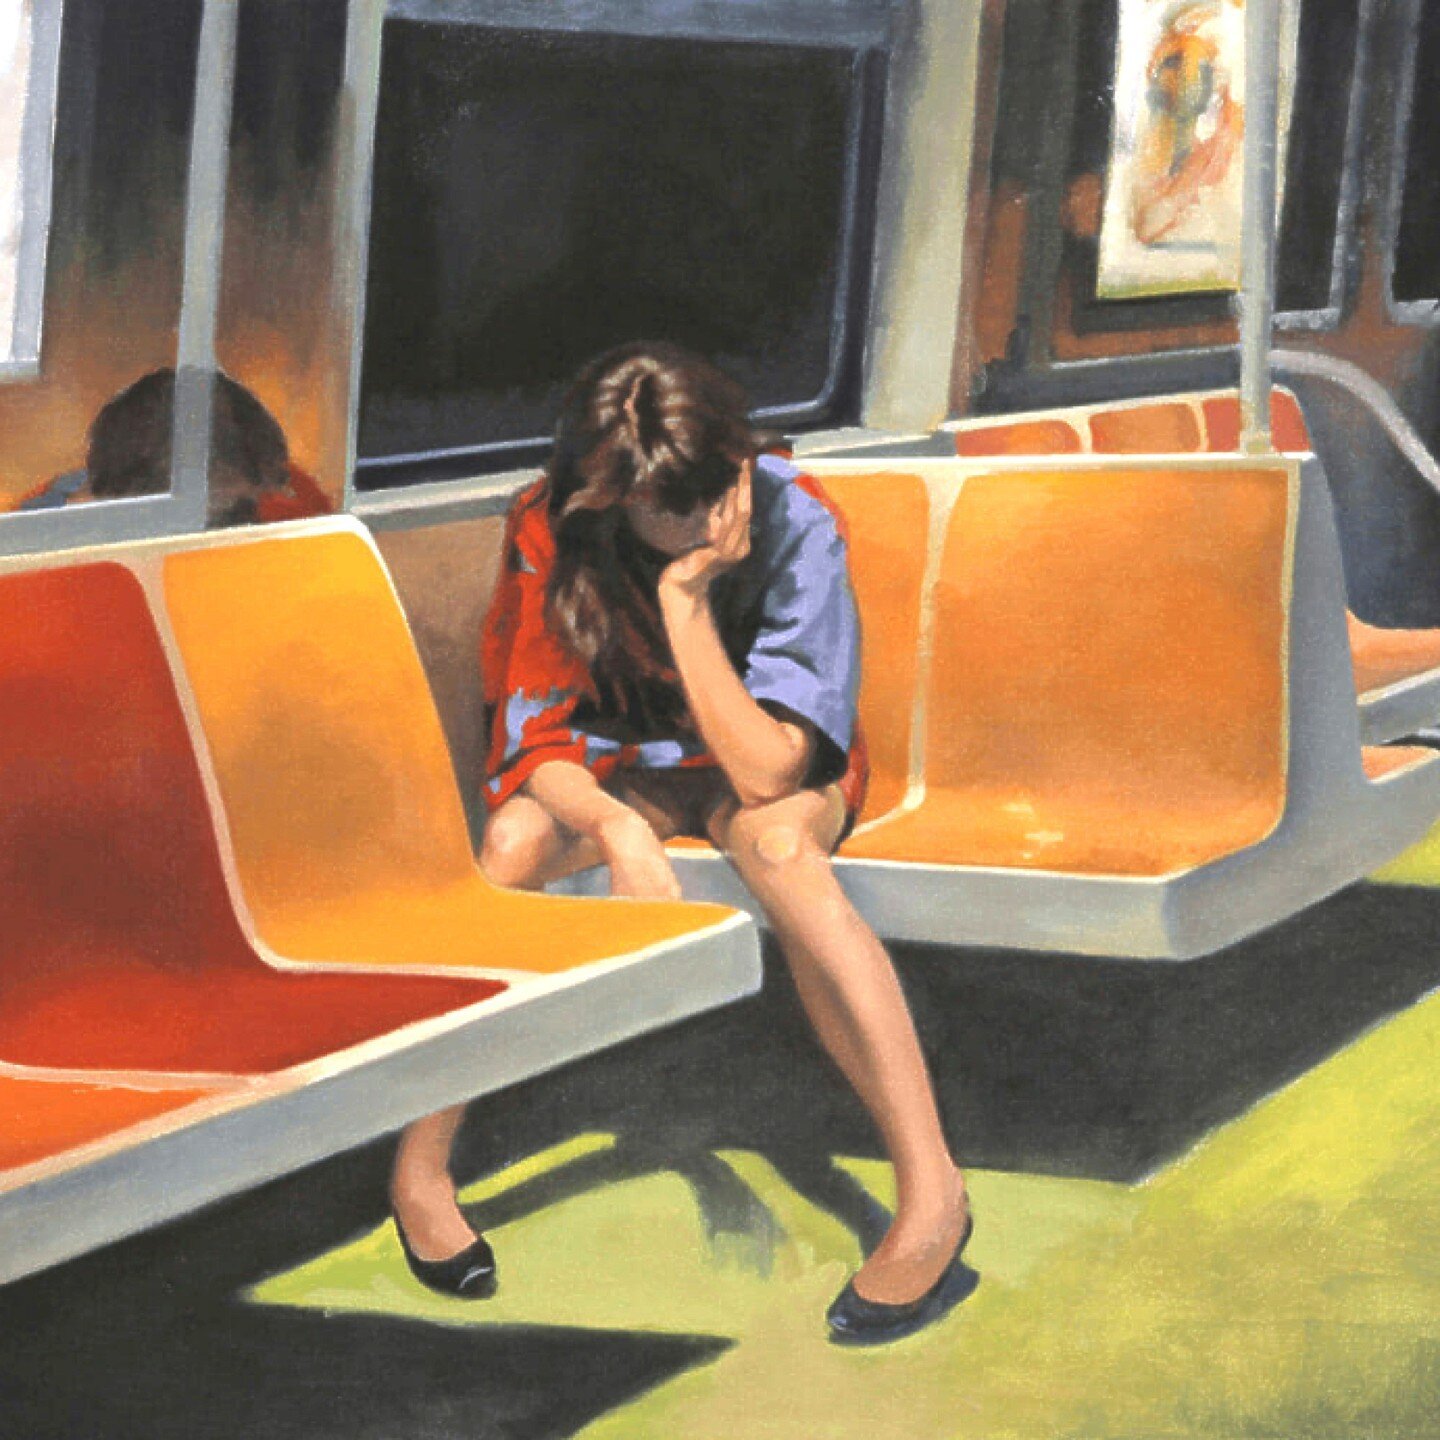 🔆 MEET THE ARTIST 🔆
I love this painting called Q Train by American realist painter Nigel van wieck.  I spent many years riding the NYC subway when I was younger and this painting reflects a familiar kind of waiting and melancholy.  Take a look at 